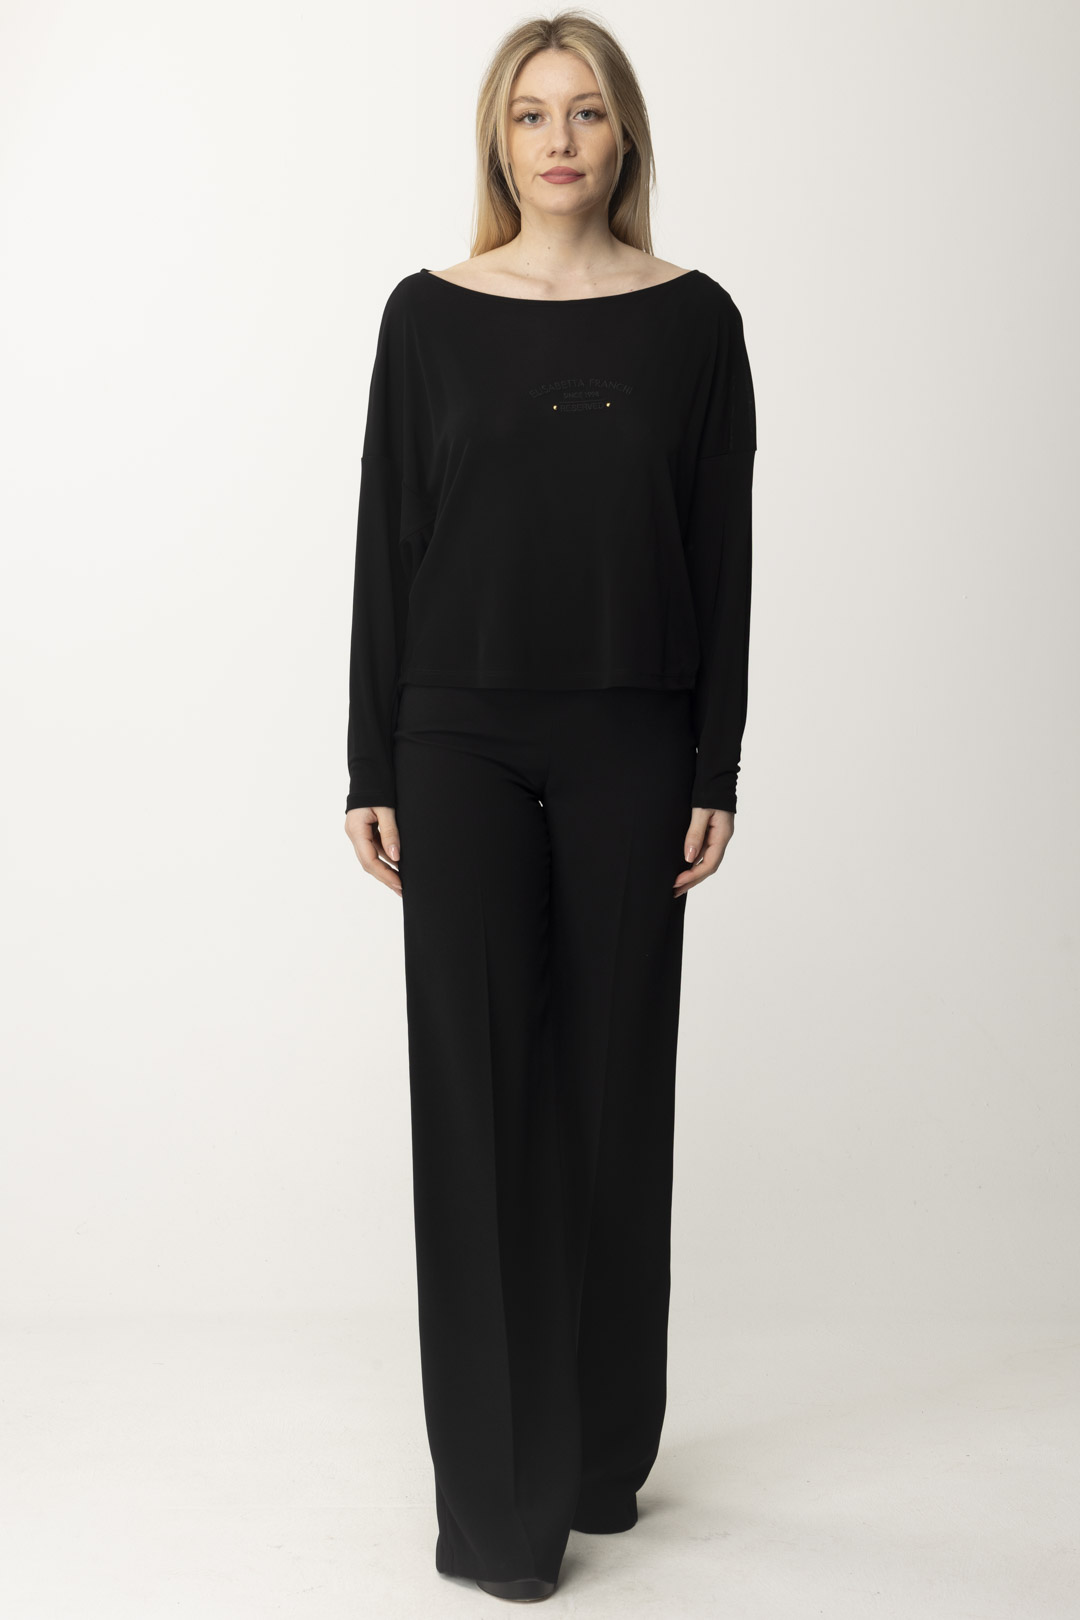 Preview: Elisabetta Franchi Tonal Embroidered Reserved Sweater Nero